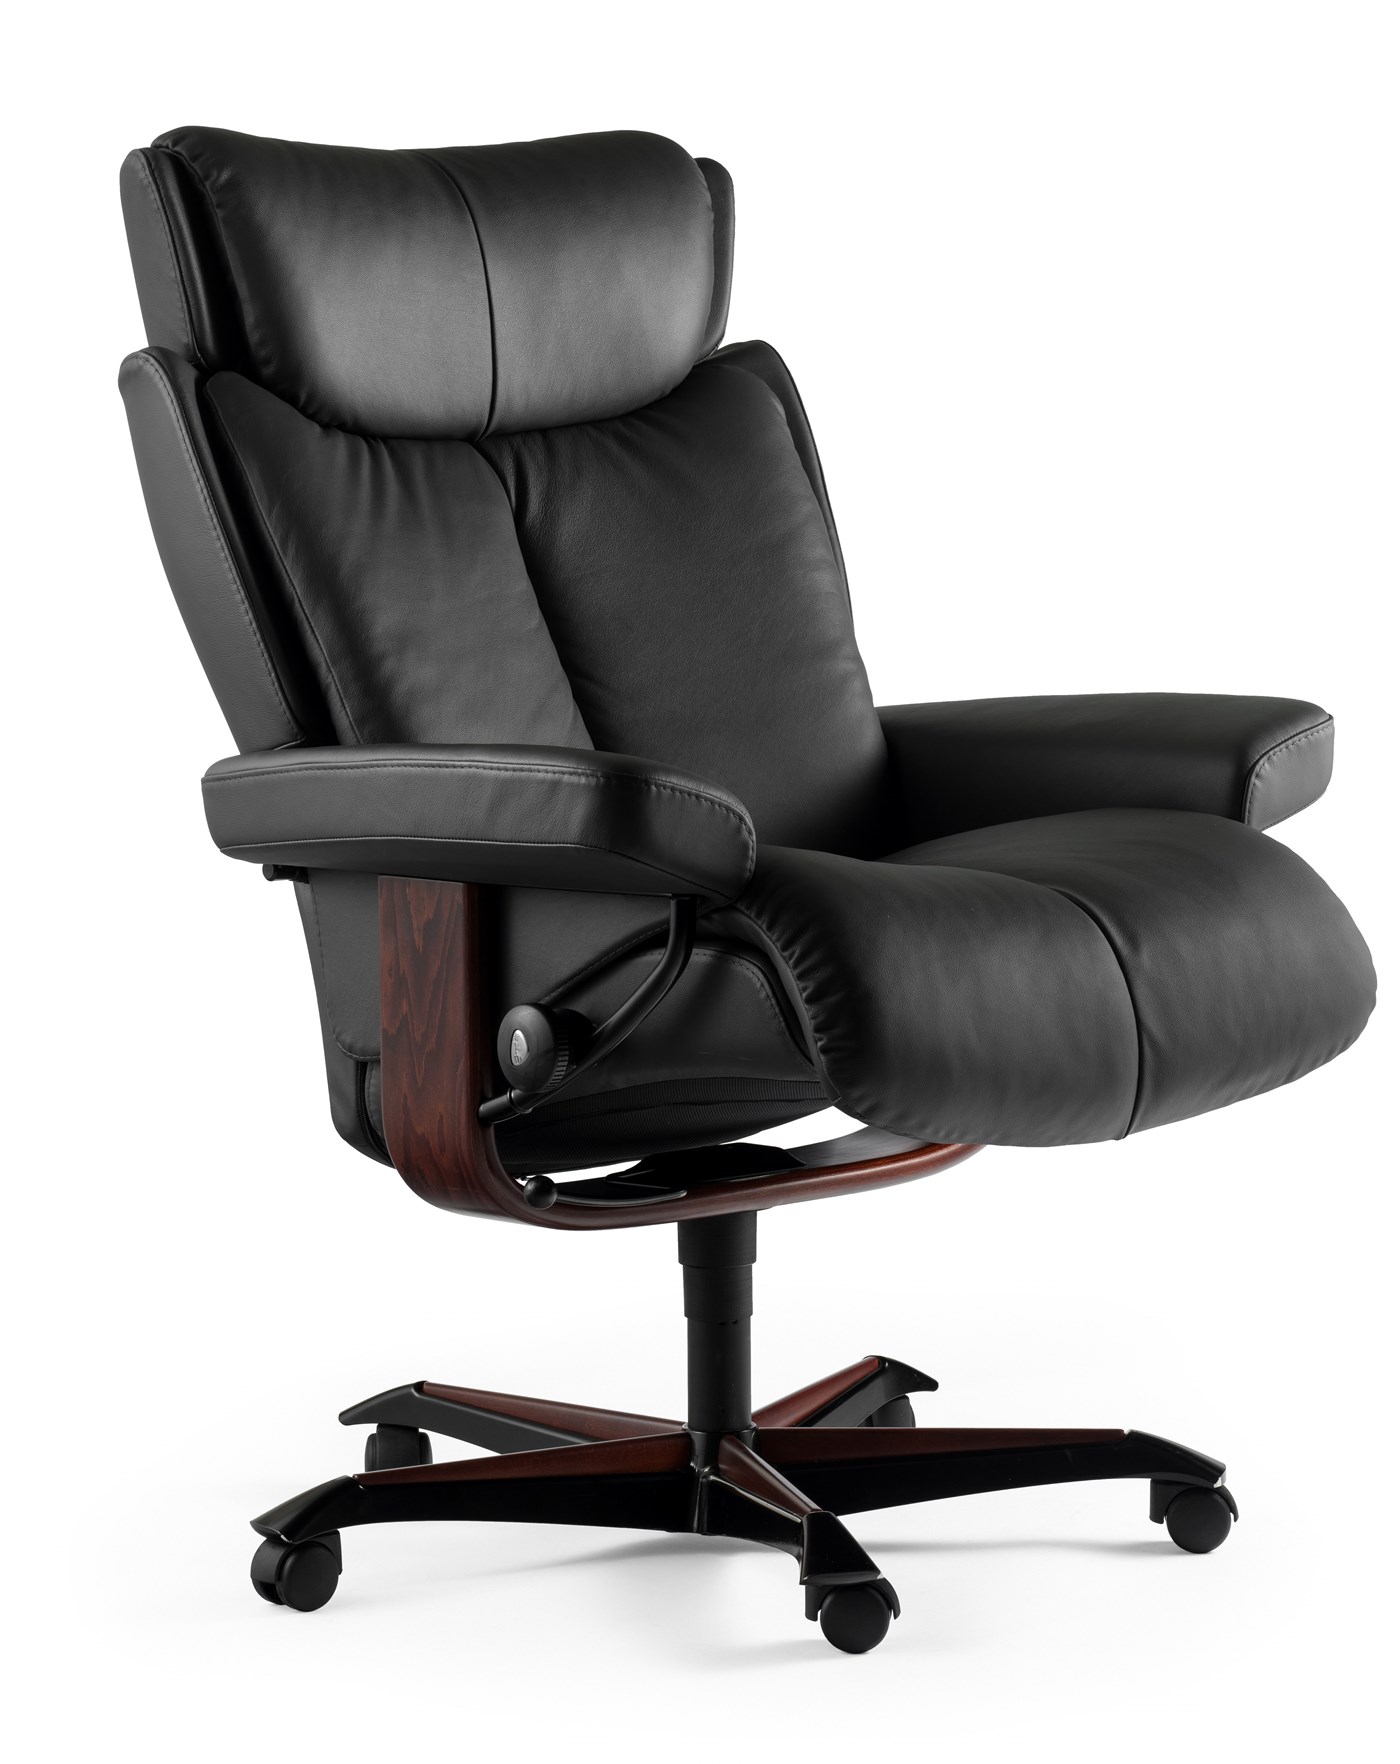 Tax time savings with the world's most comfortable office chairs